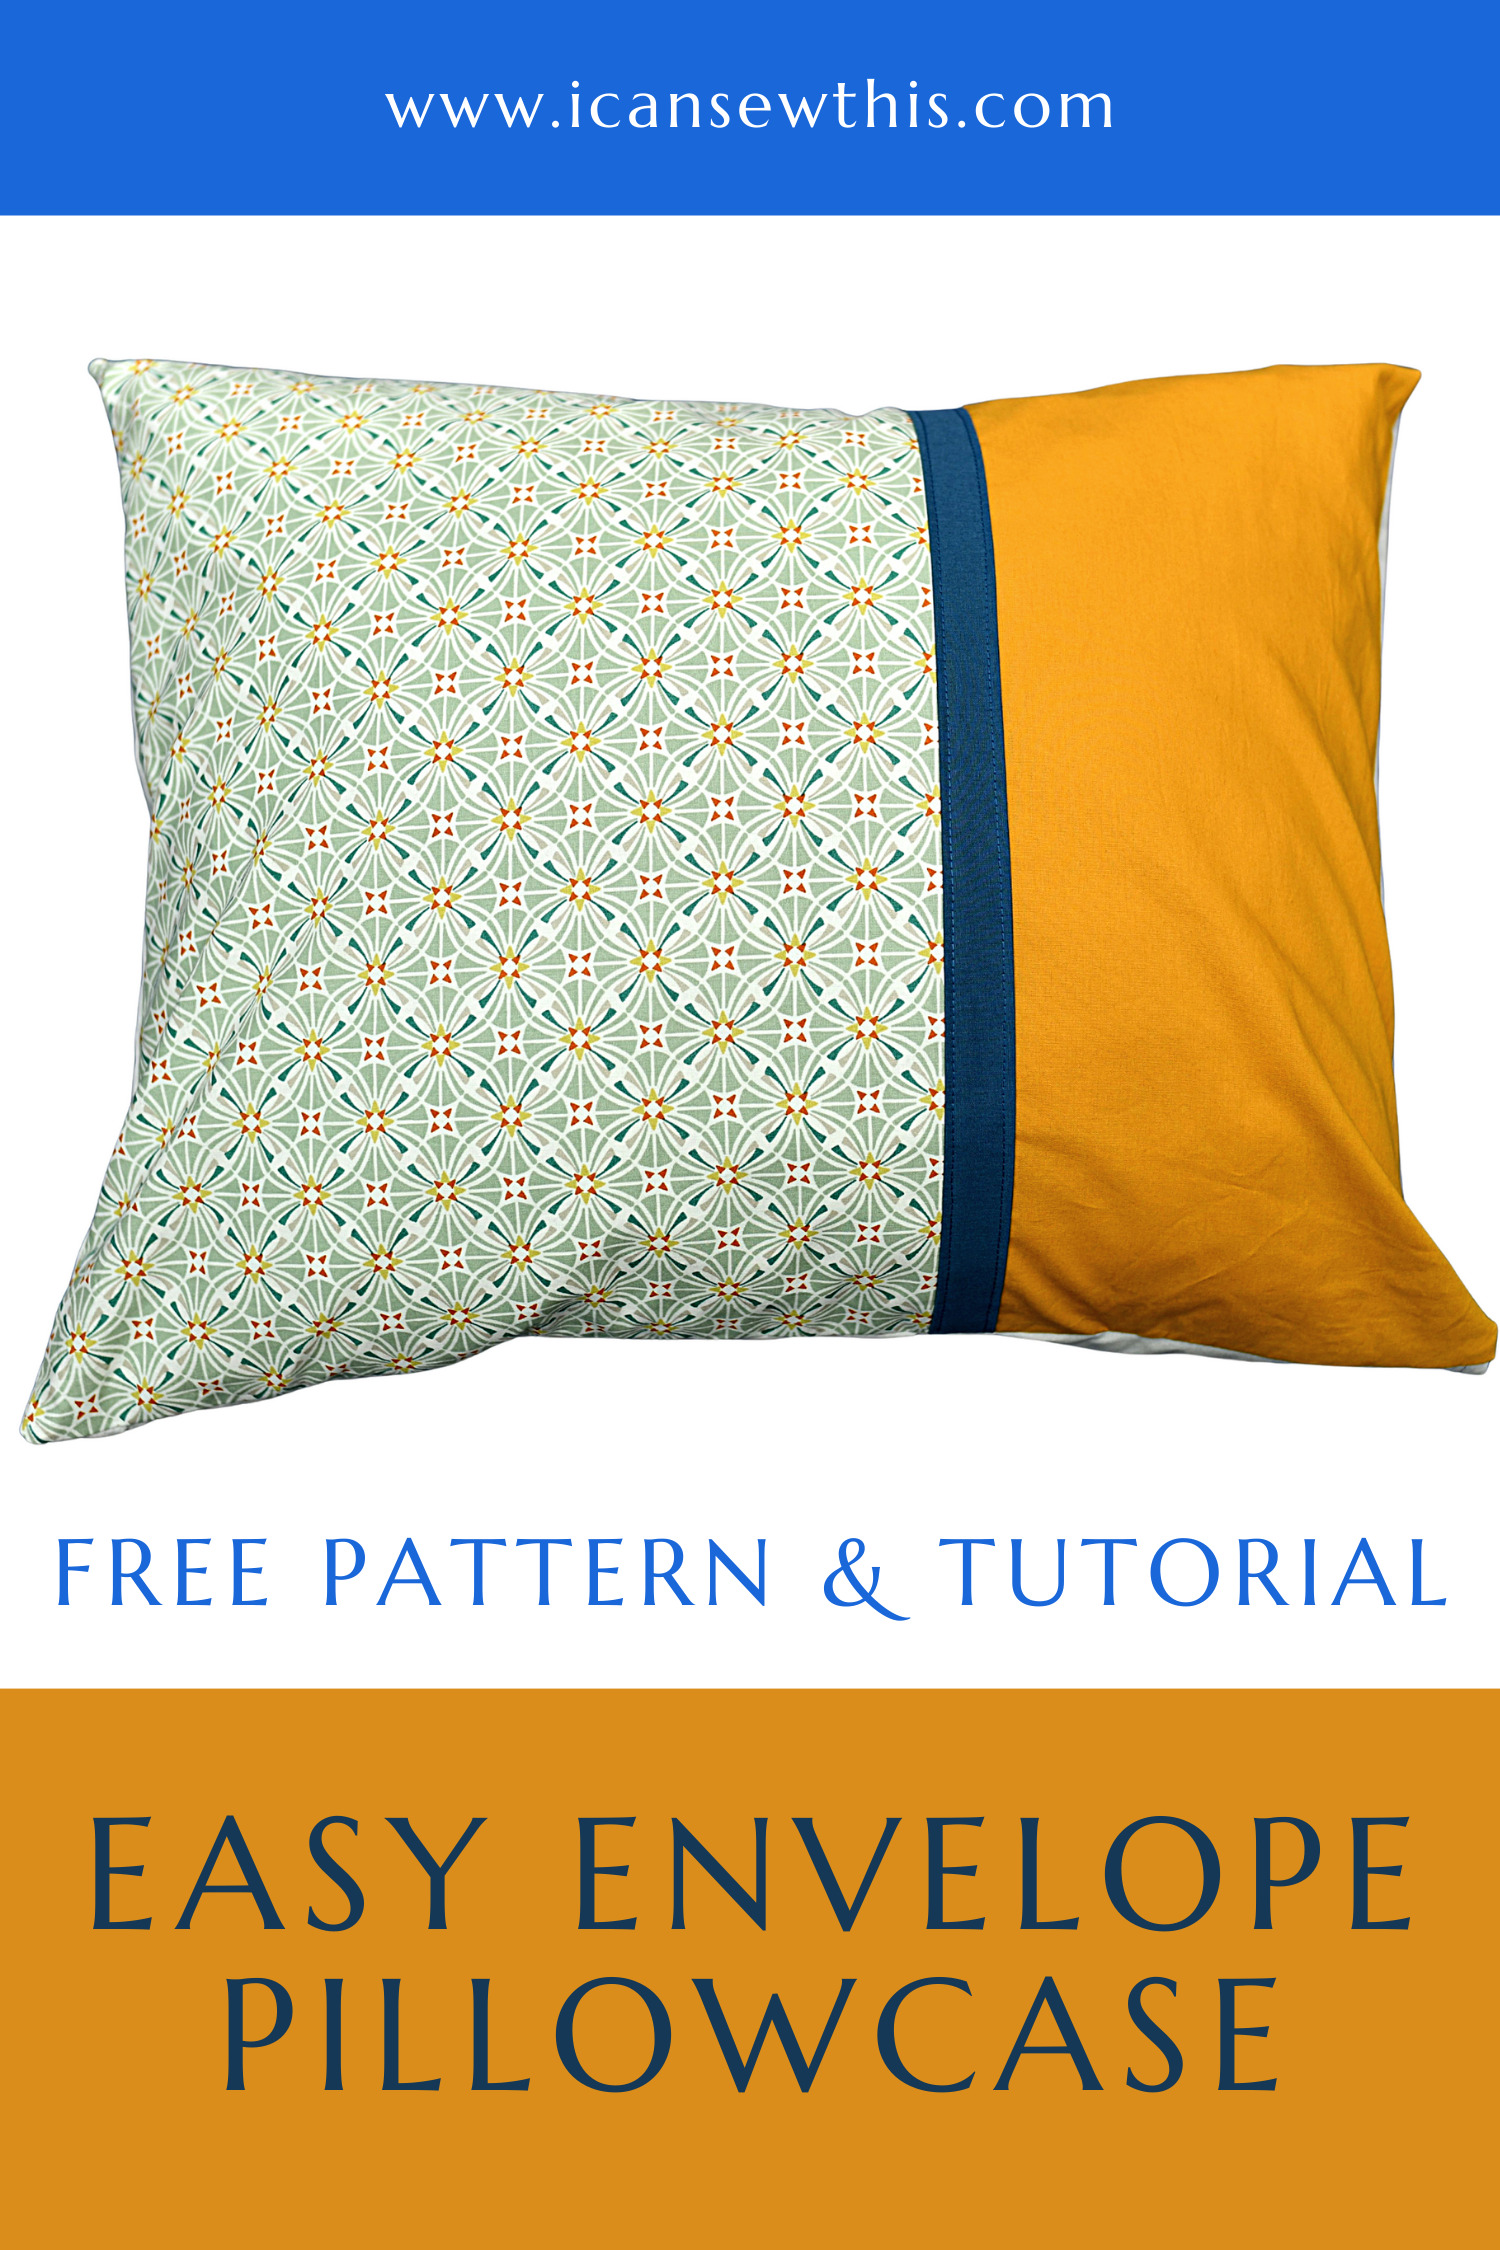 How to Make a Pillowcase (Standard Size) in 15 Minutes